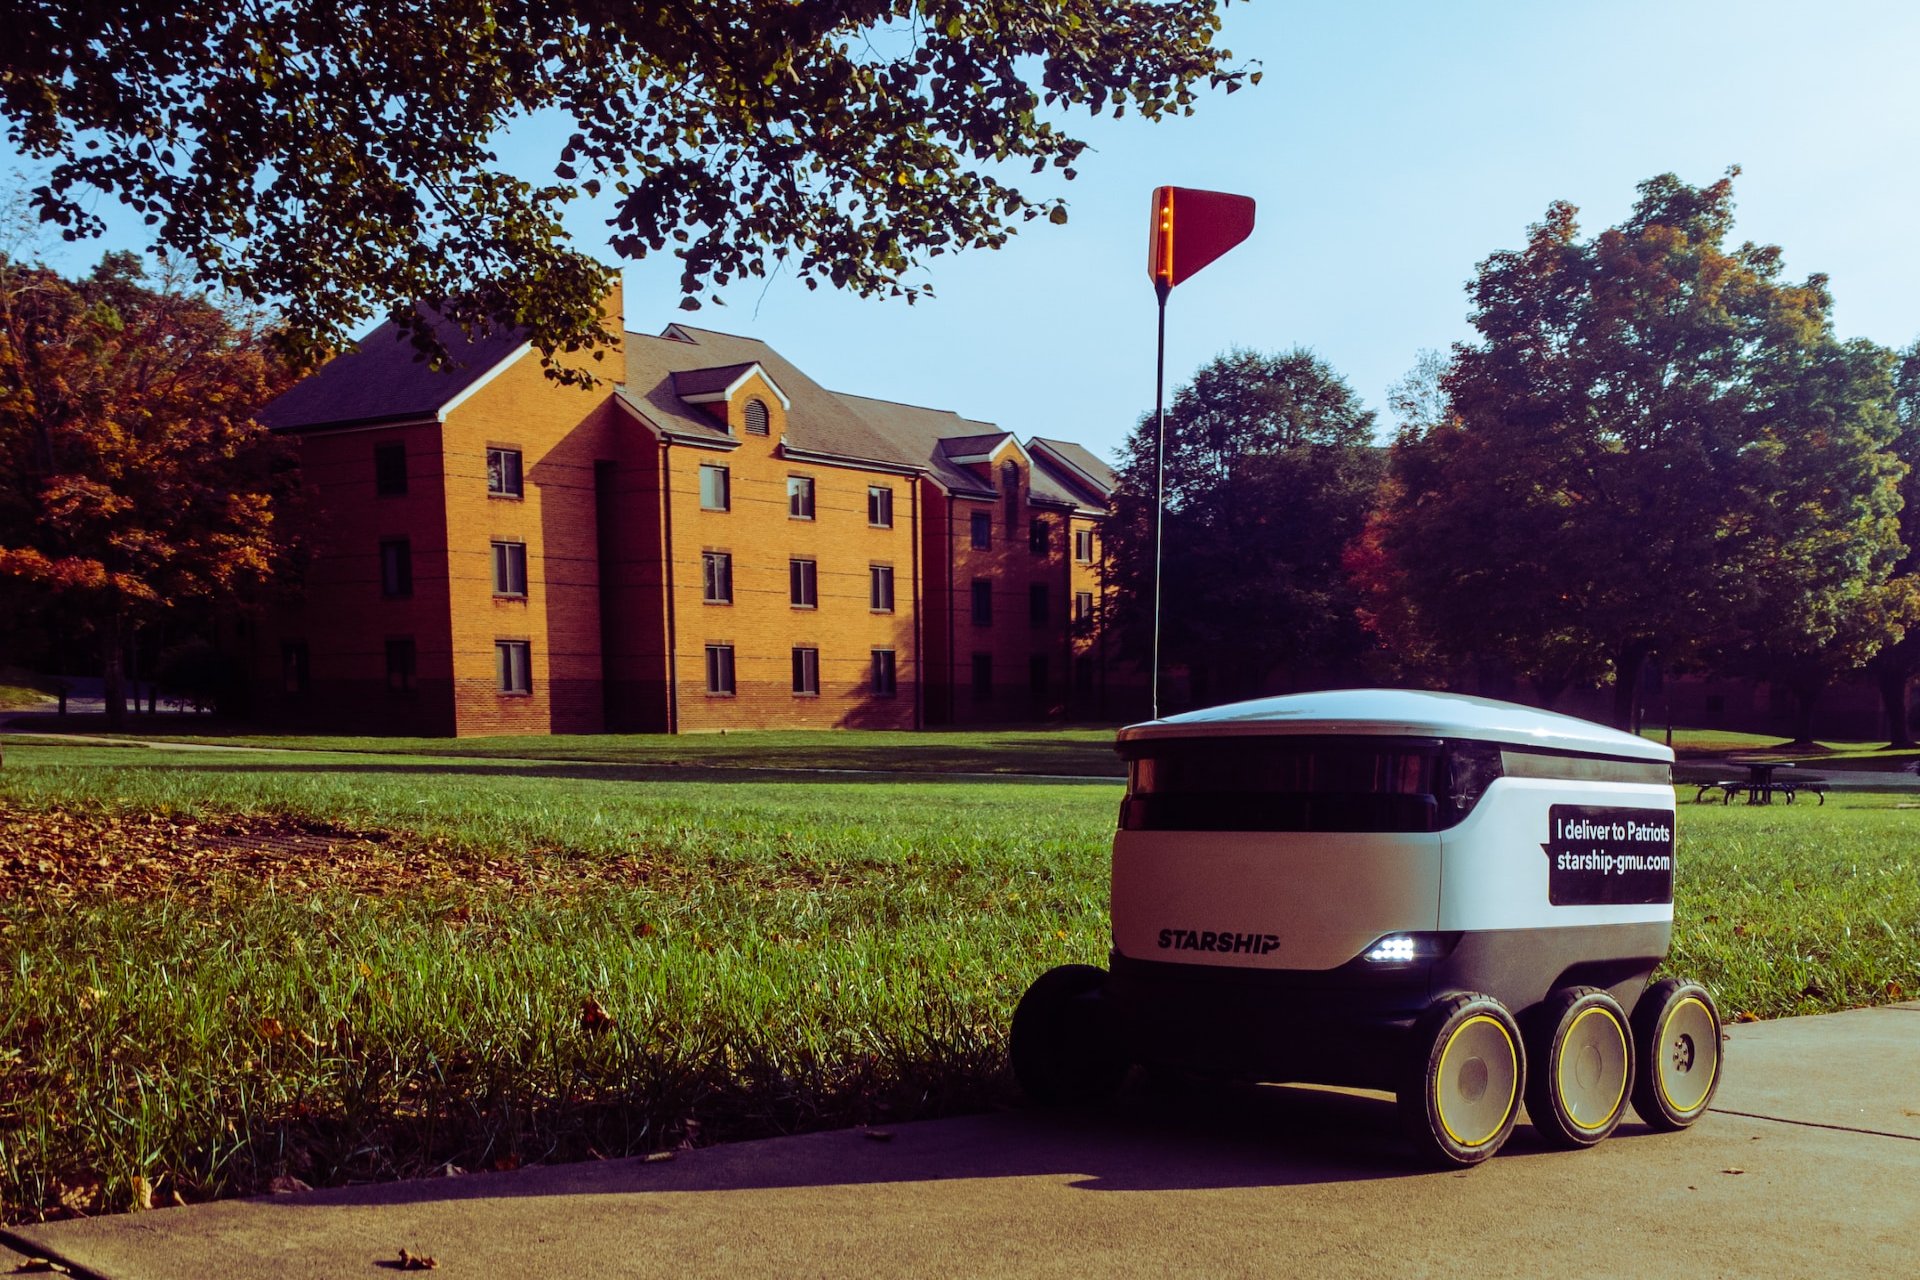 Save the Environment and Use Autonomous Delivery Robots